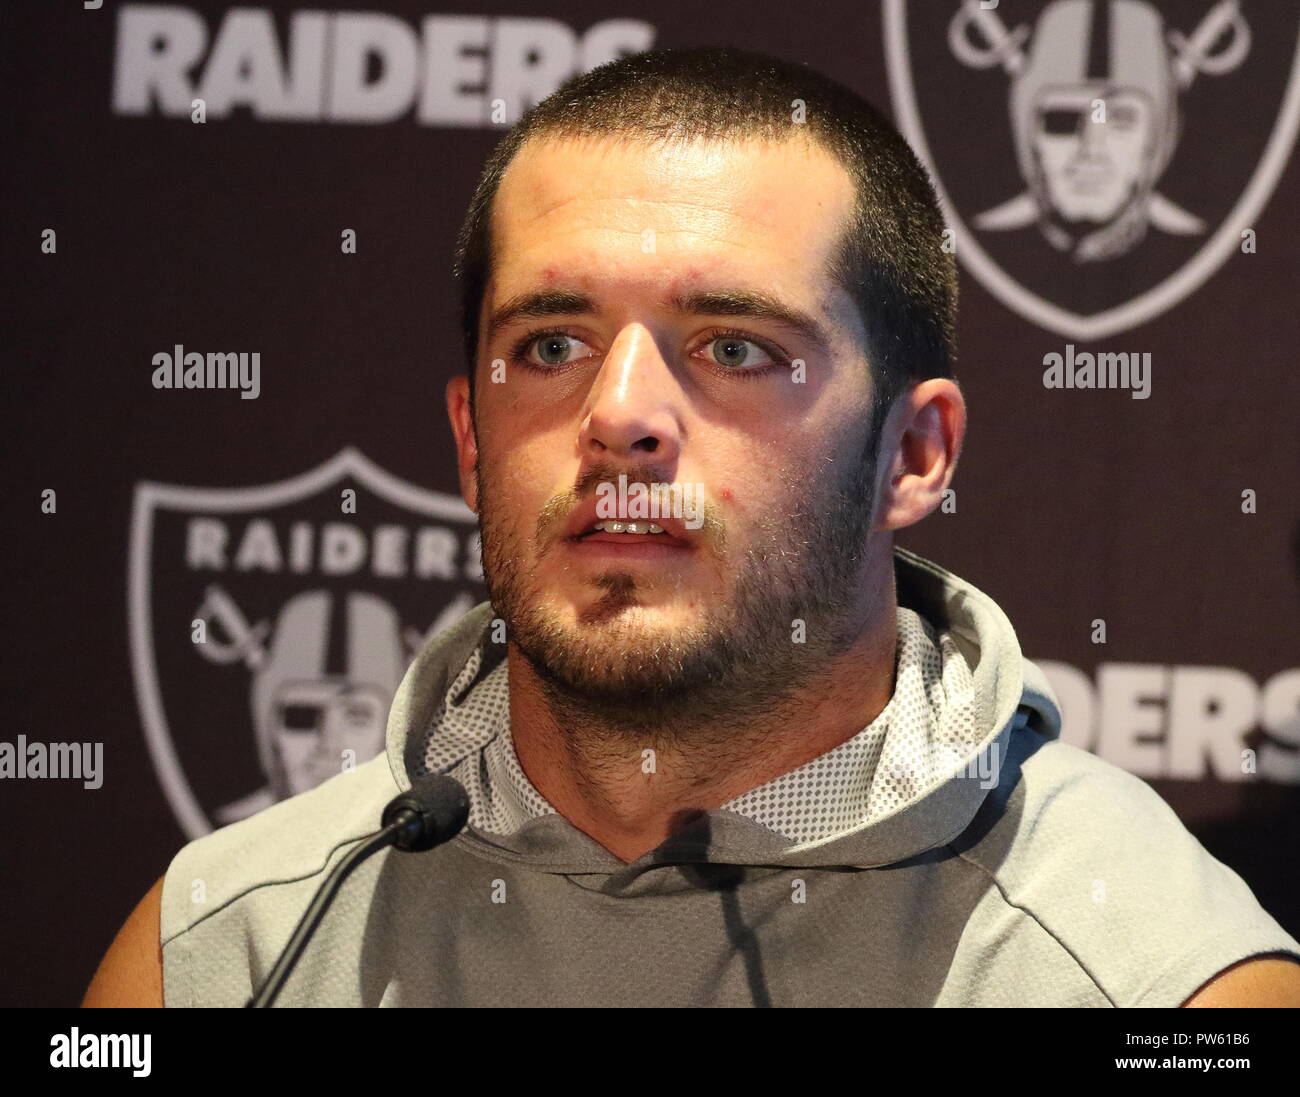 London, UK. 12th October, 2018. Quarterback Derek Carr at the Oakland Raiders Press Conference at the London Hilton, Wembley, UK ahead of their NFL UK International Series game vs Seattle Seahawks, Wembley Stadium, London, UK, 12th October 2018  Photo by Keith Mayhew Credit: KEITH MAYHEW/Alamy Live News Stock Photo